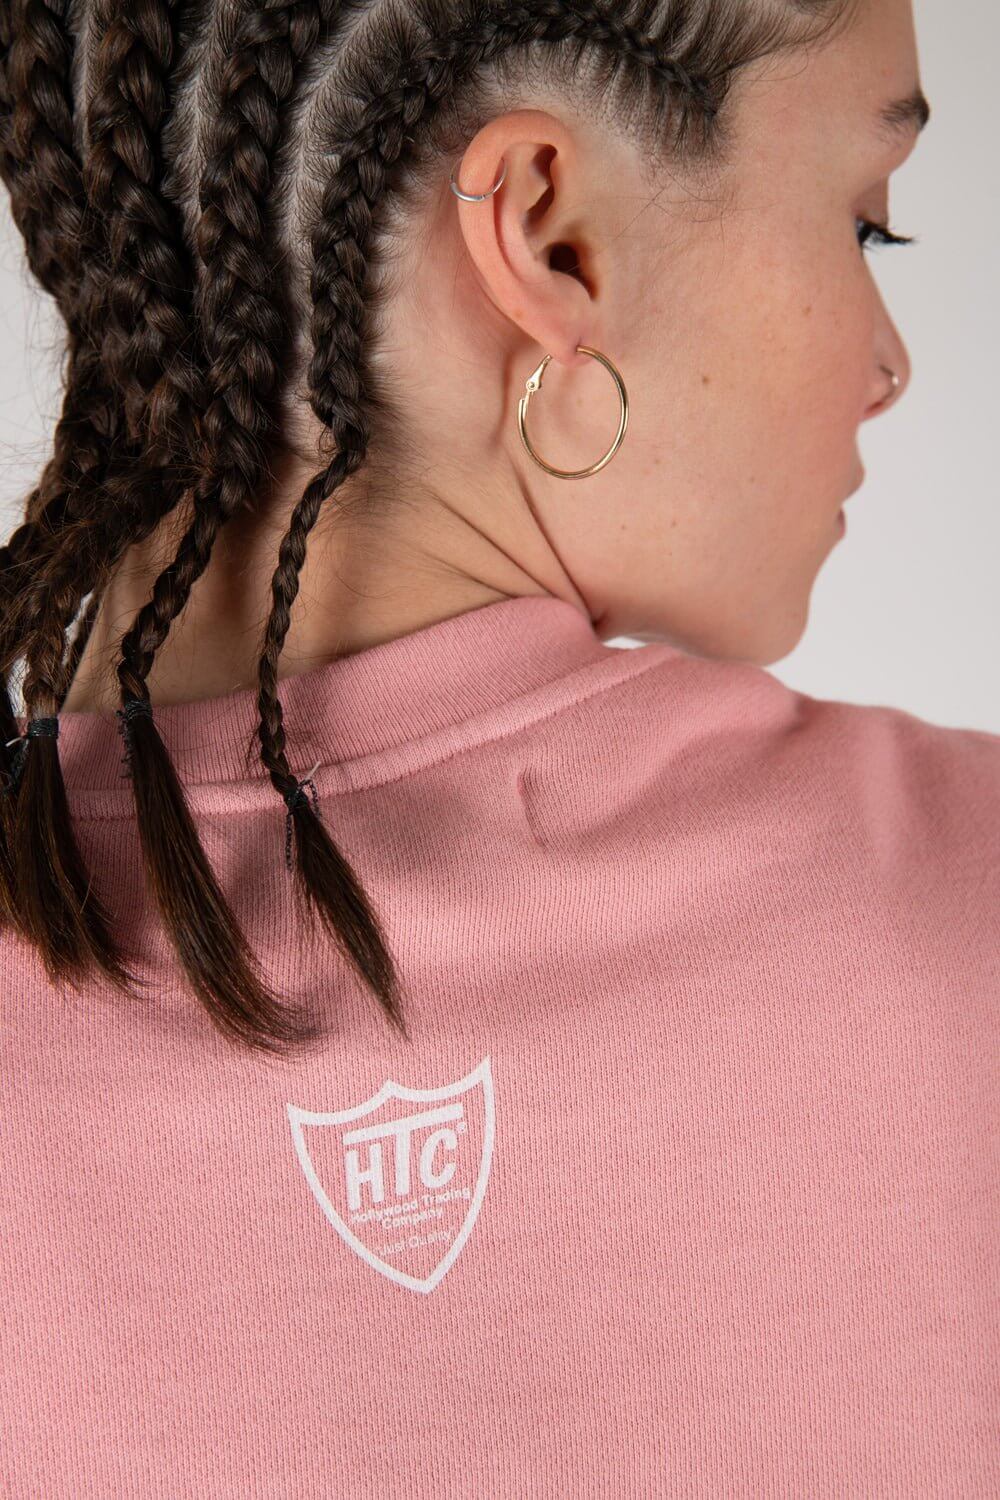 HTC CROP LOGO Crop sweater with HTC logo on the front. Composition: 100% Cotton HTC LOS ANGELES